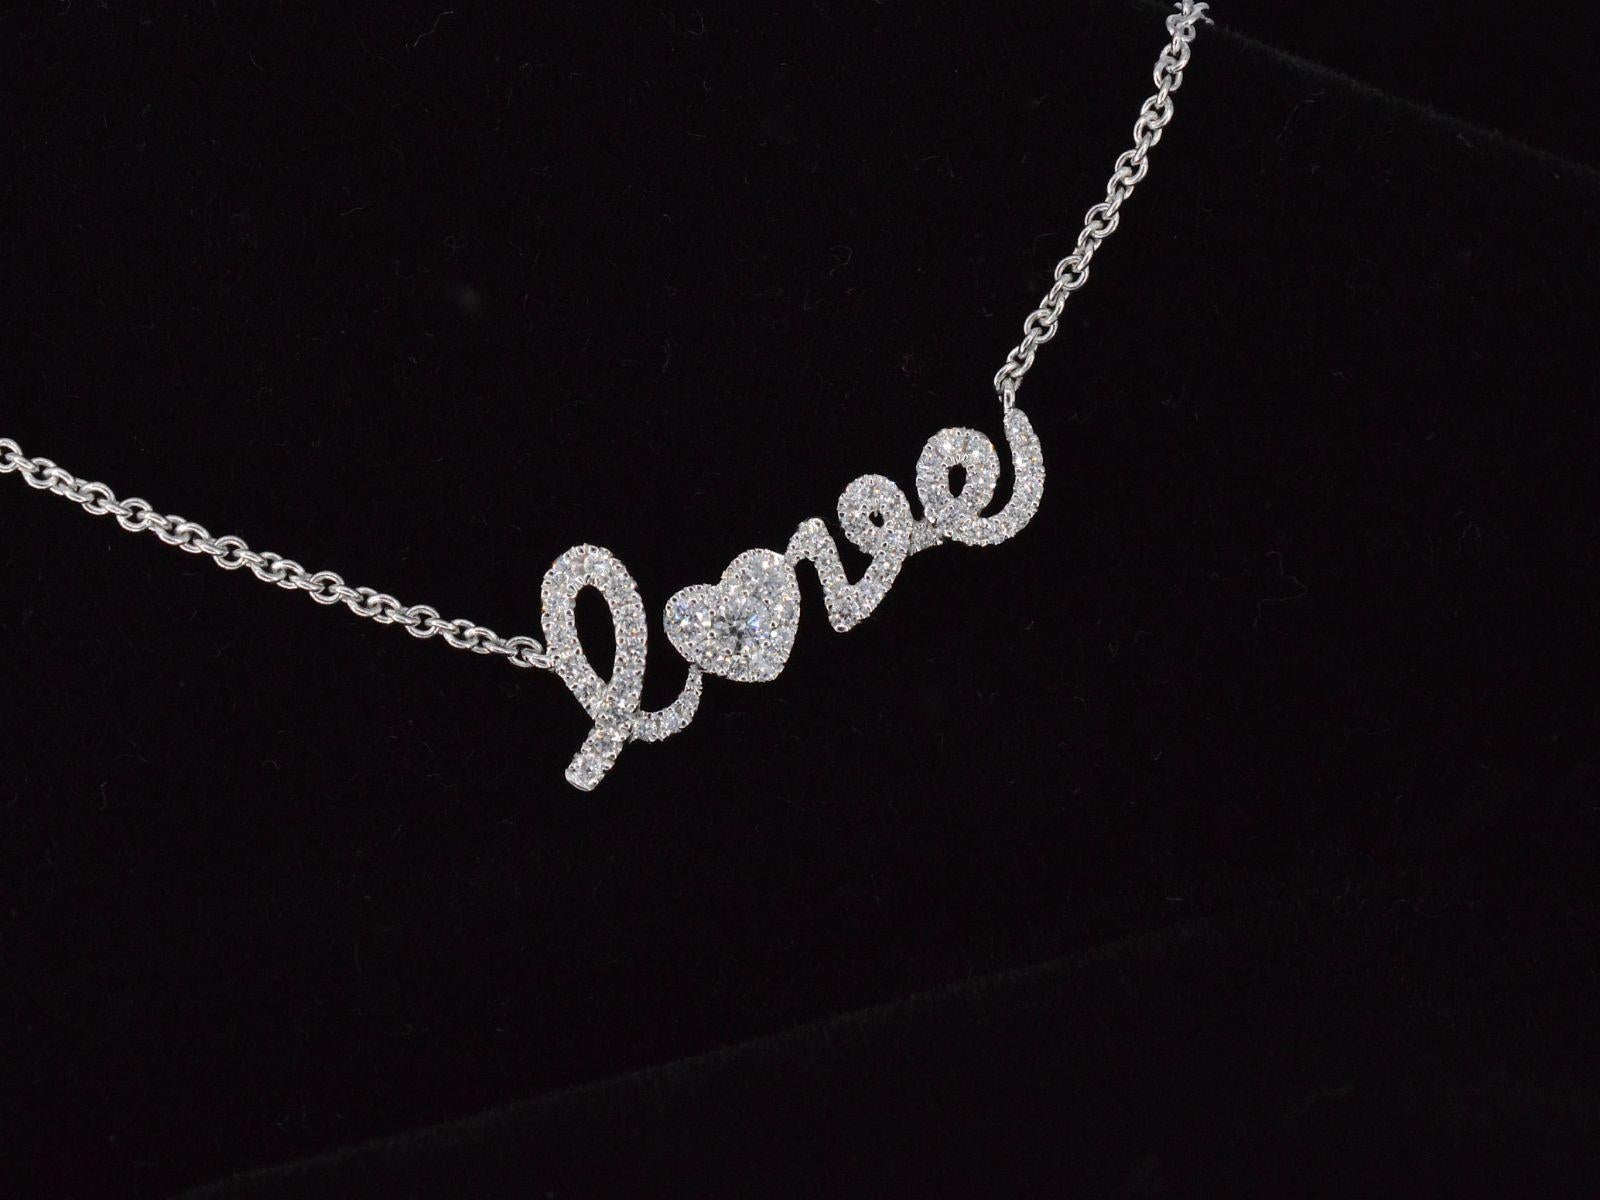 White Gold 'Love' Necklace with Diamonds For Sale 2